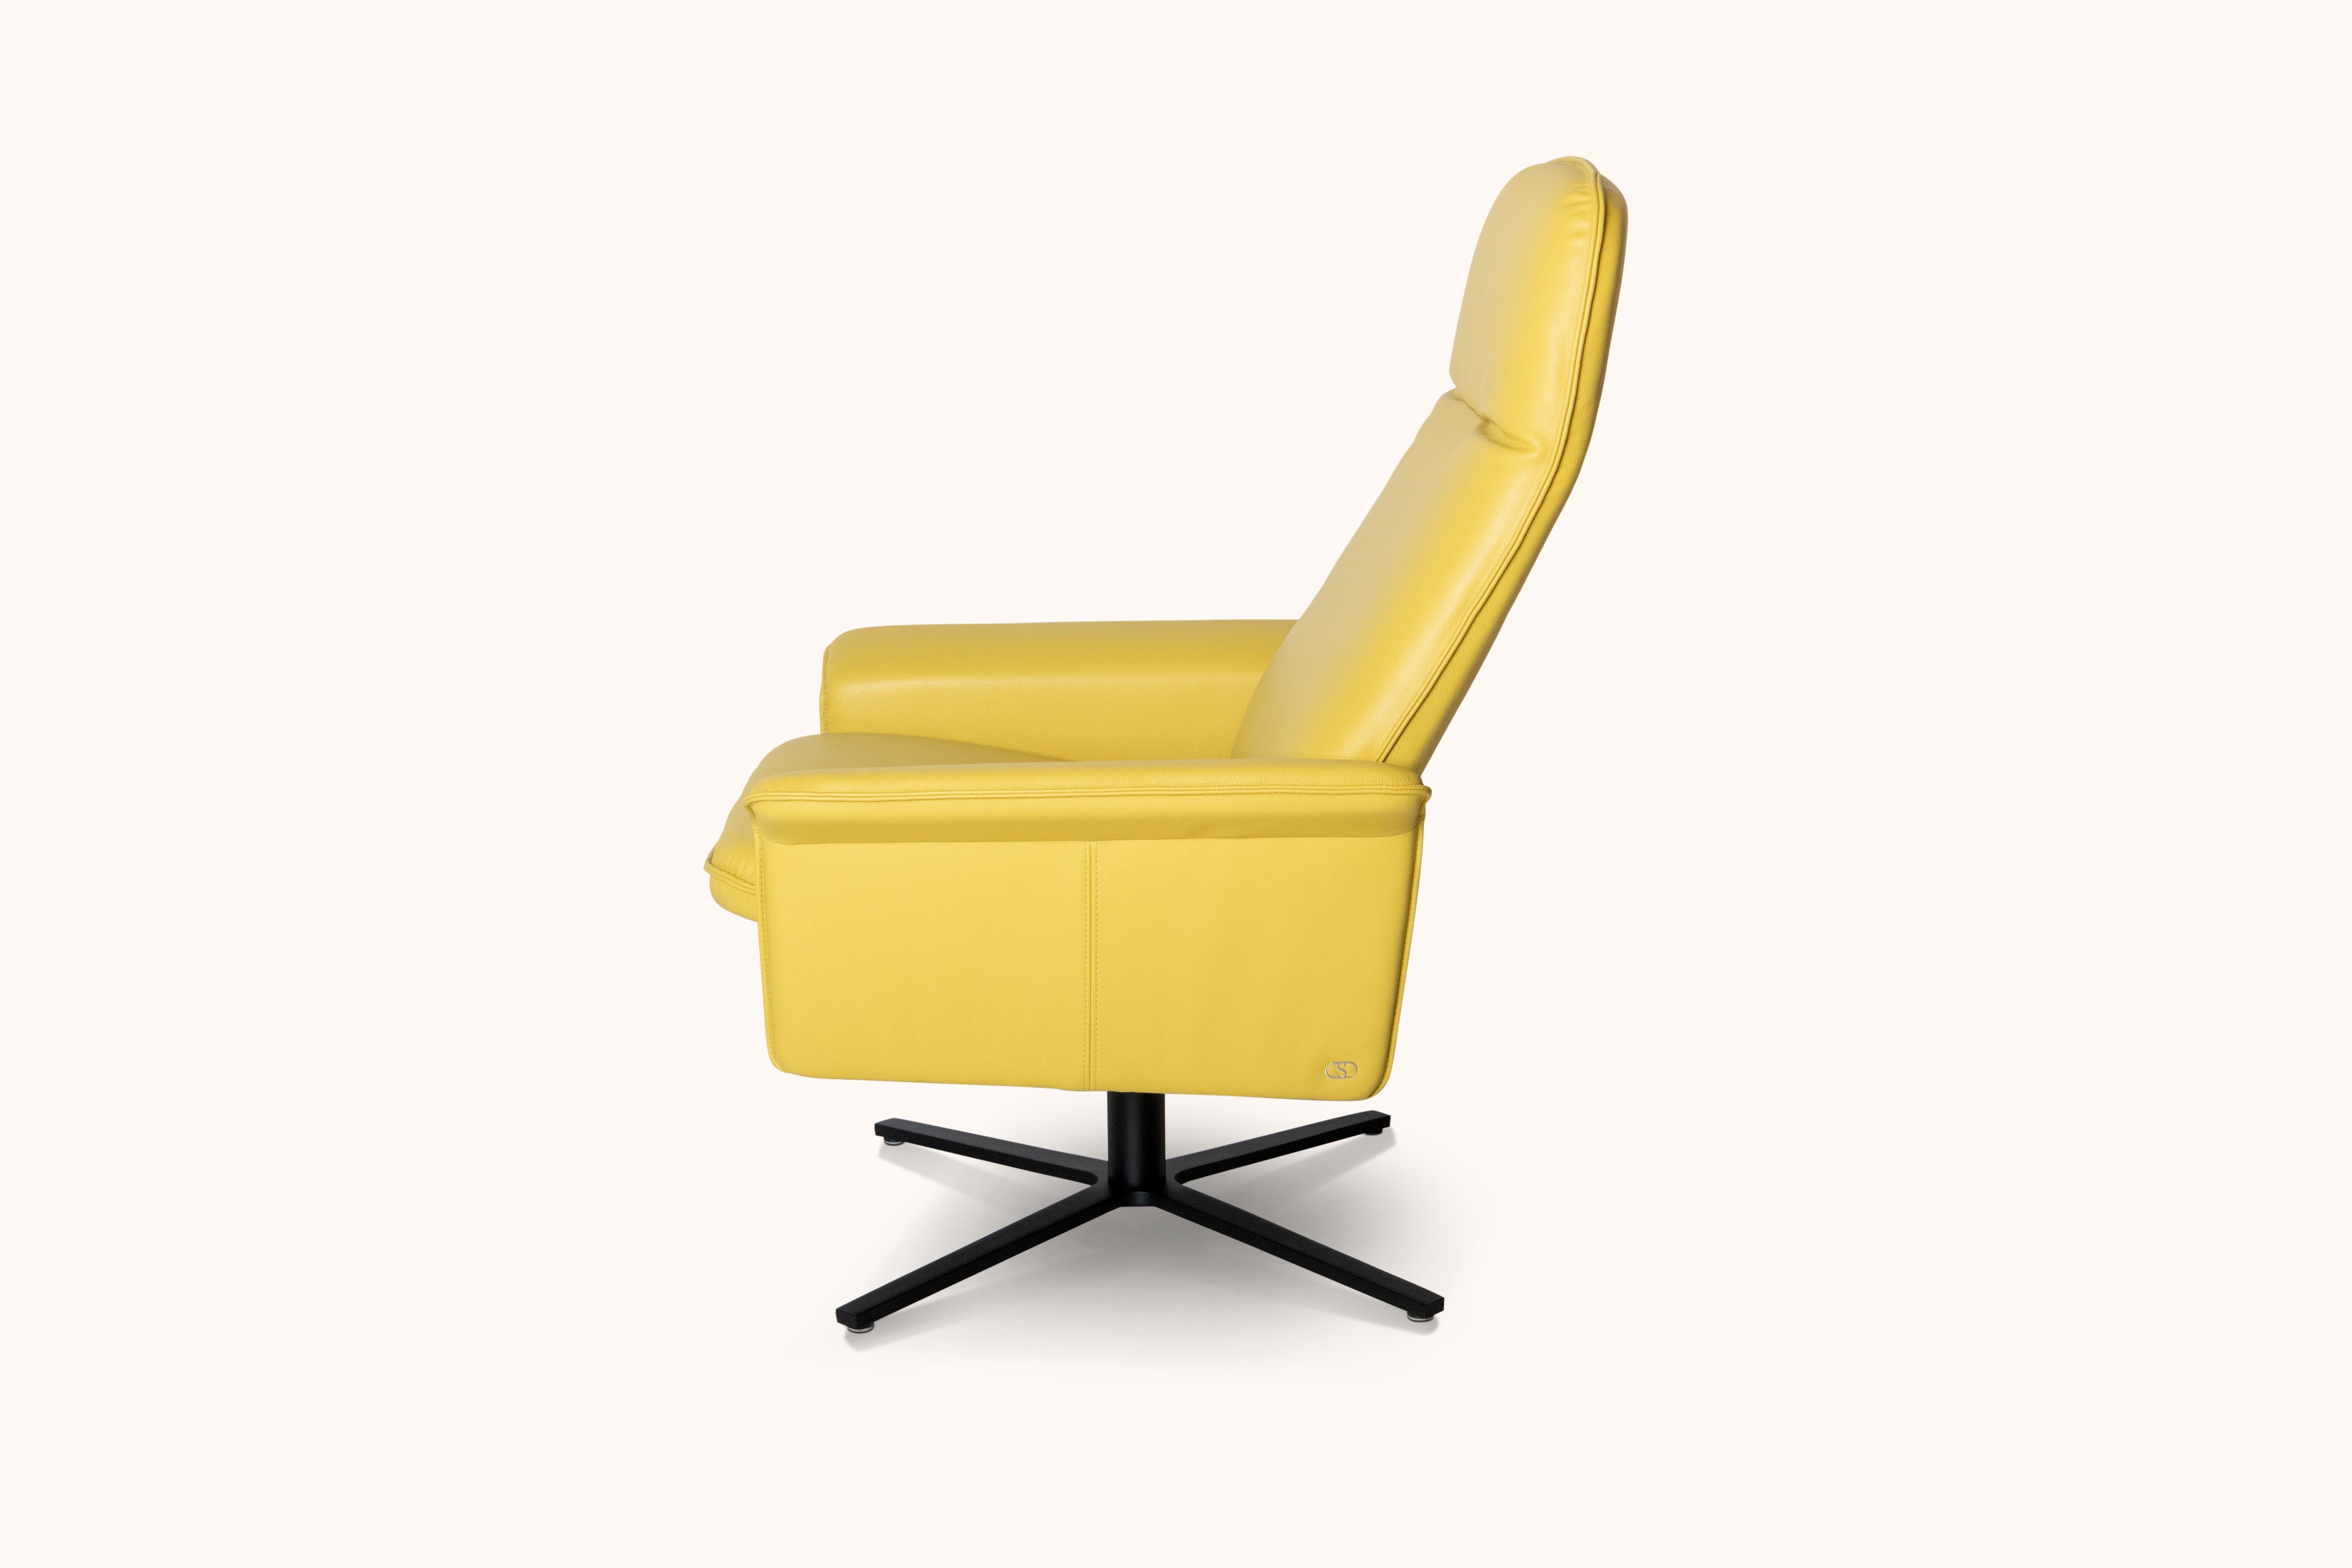 Modern De Sede DS 55 High Back Chair in Yellow Leather Upholstery, De Sede Design Team For Sale